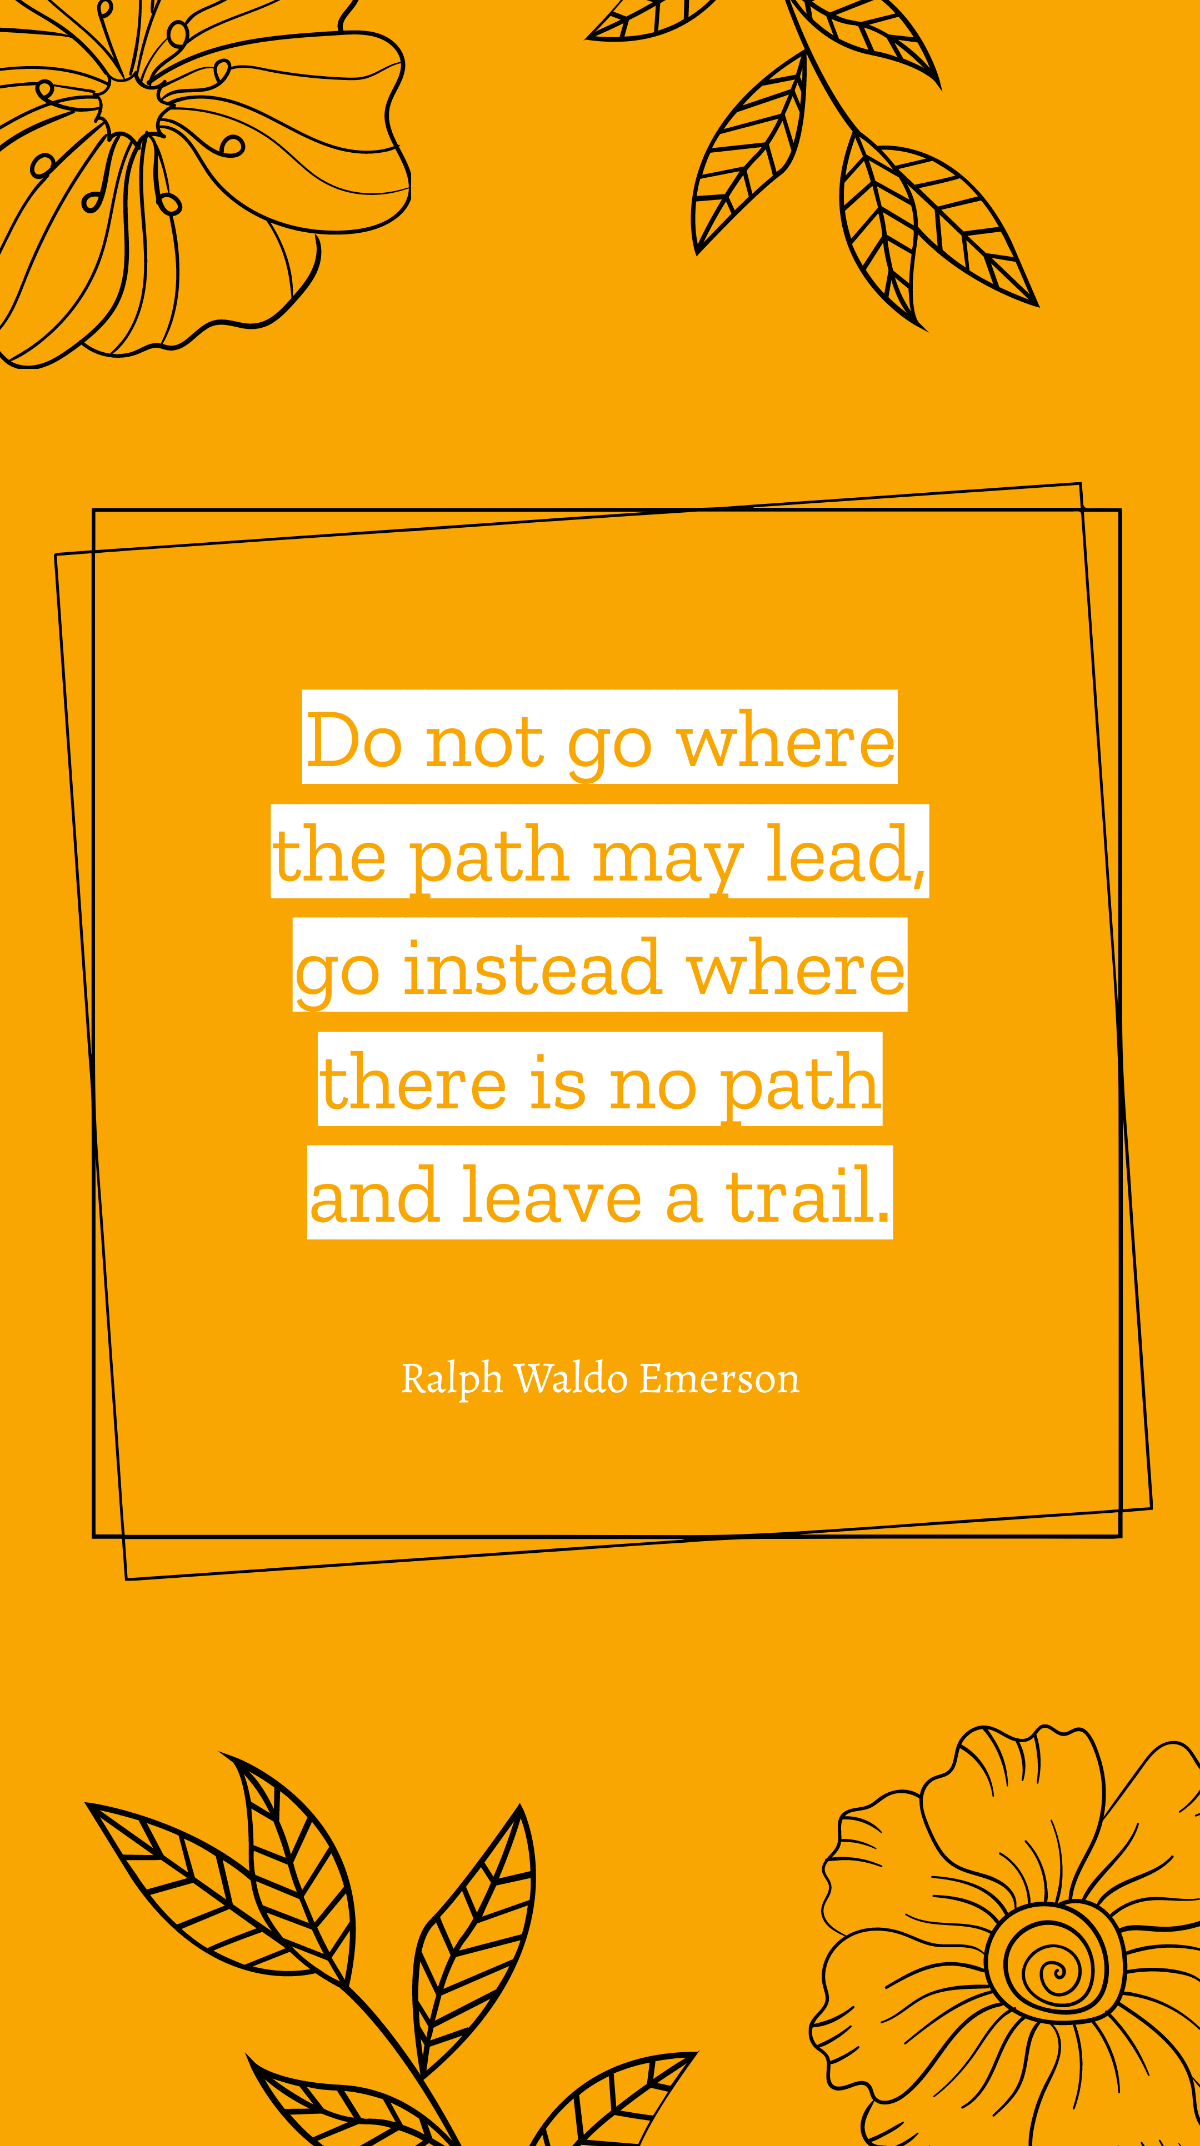 Ralph Waldo Emerson - Do not go where the path may lead, go instead where there is no path and leave a trail